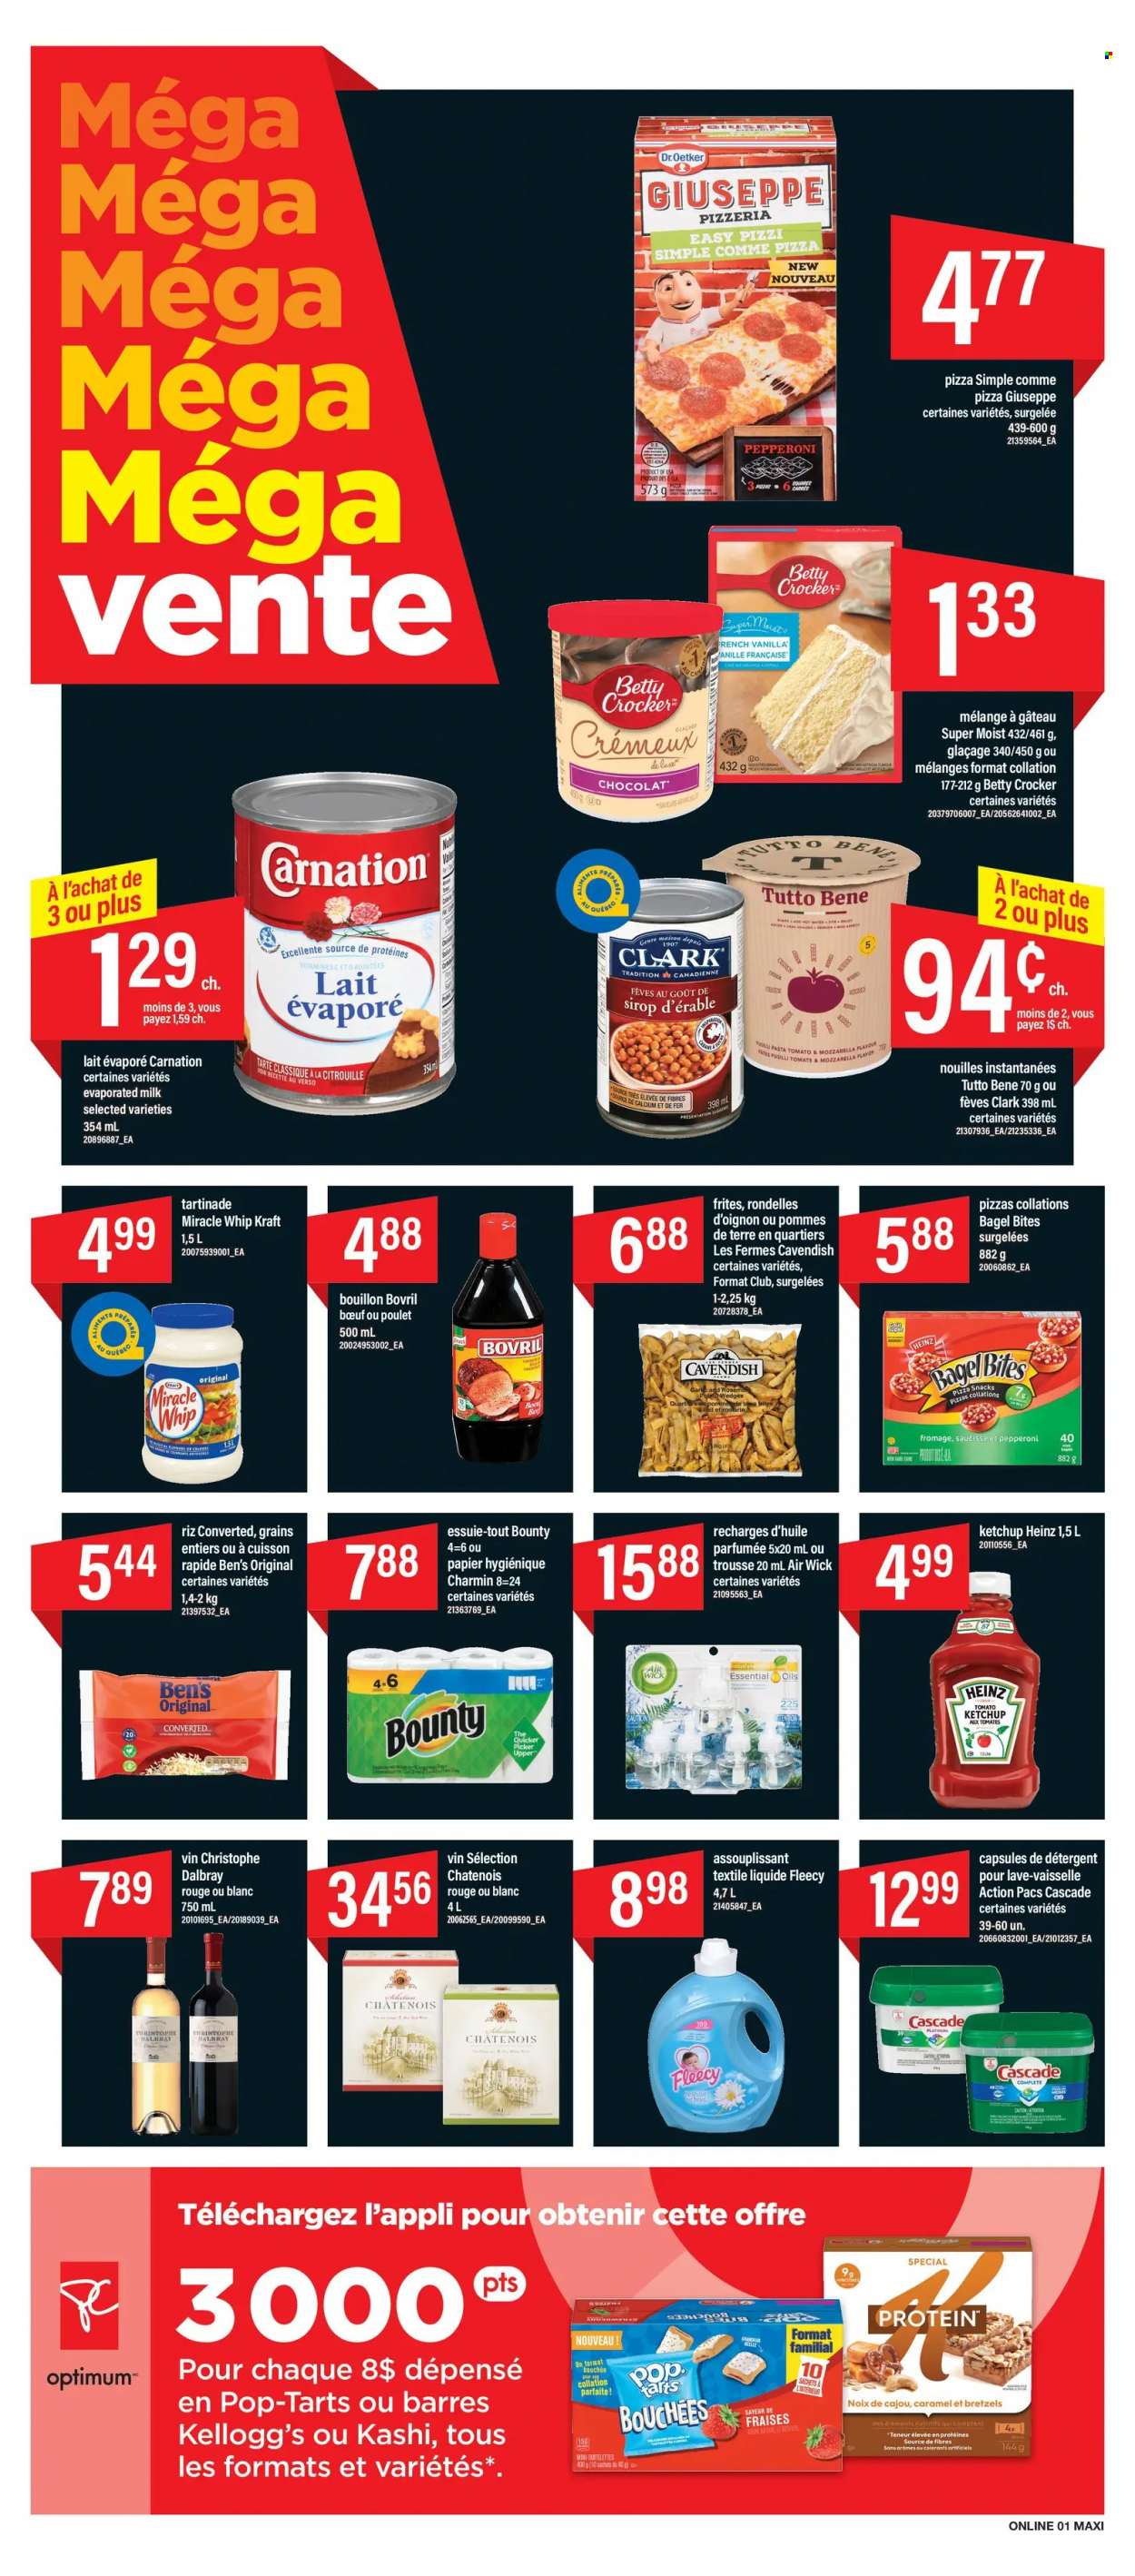 thumbnail - Maxi Flyer - January 20, 2022 - January 26, 2022 - Sales products - bagels, pizza, pasta, Kraft®, pepperoni, Dr. Oetker, evaporated milk, Miracle Whip, snack, Bounty, Kellogg's, Pop-Tarts, bouillon, caramel, Charmin, Cascade, Heinz, calcium, detergent, ketchup. Page 6.